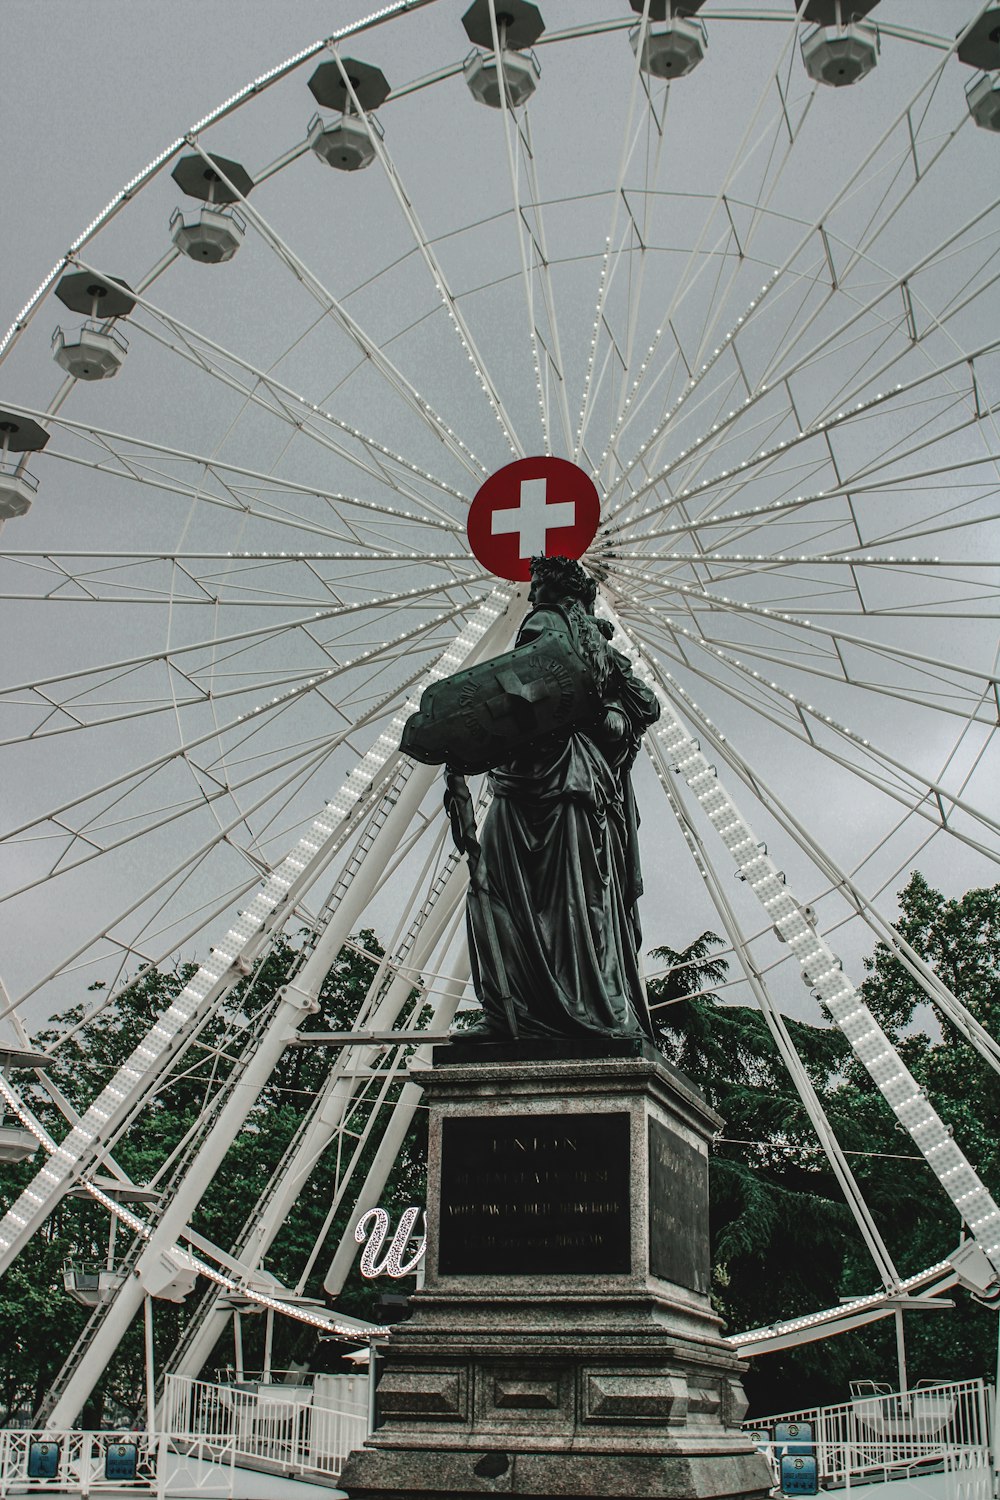 a large ferris wheel with a statue in front of it